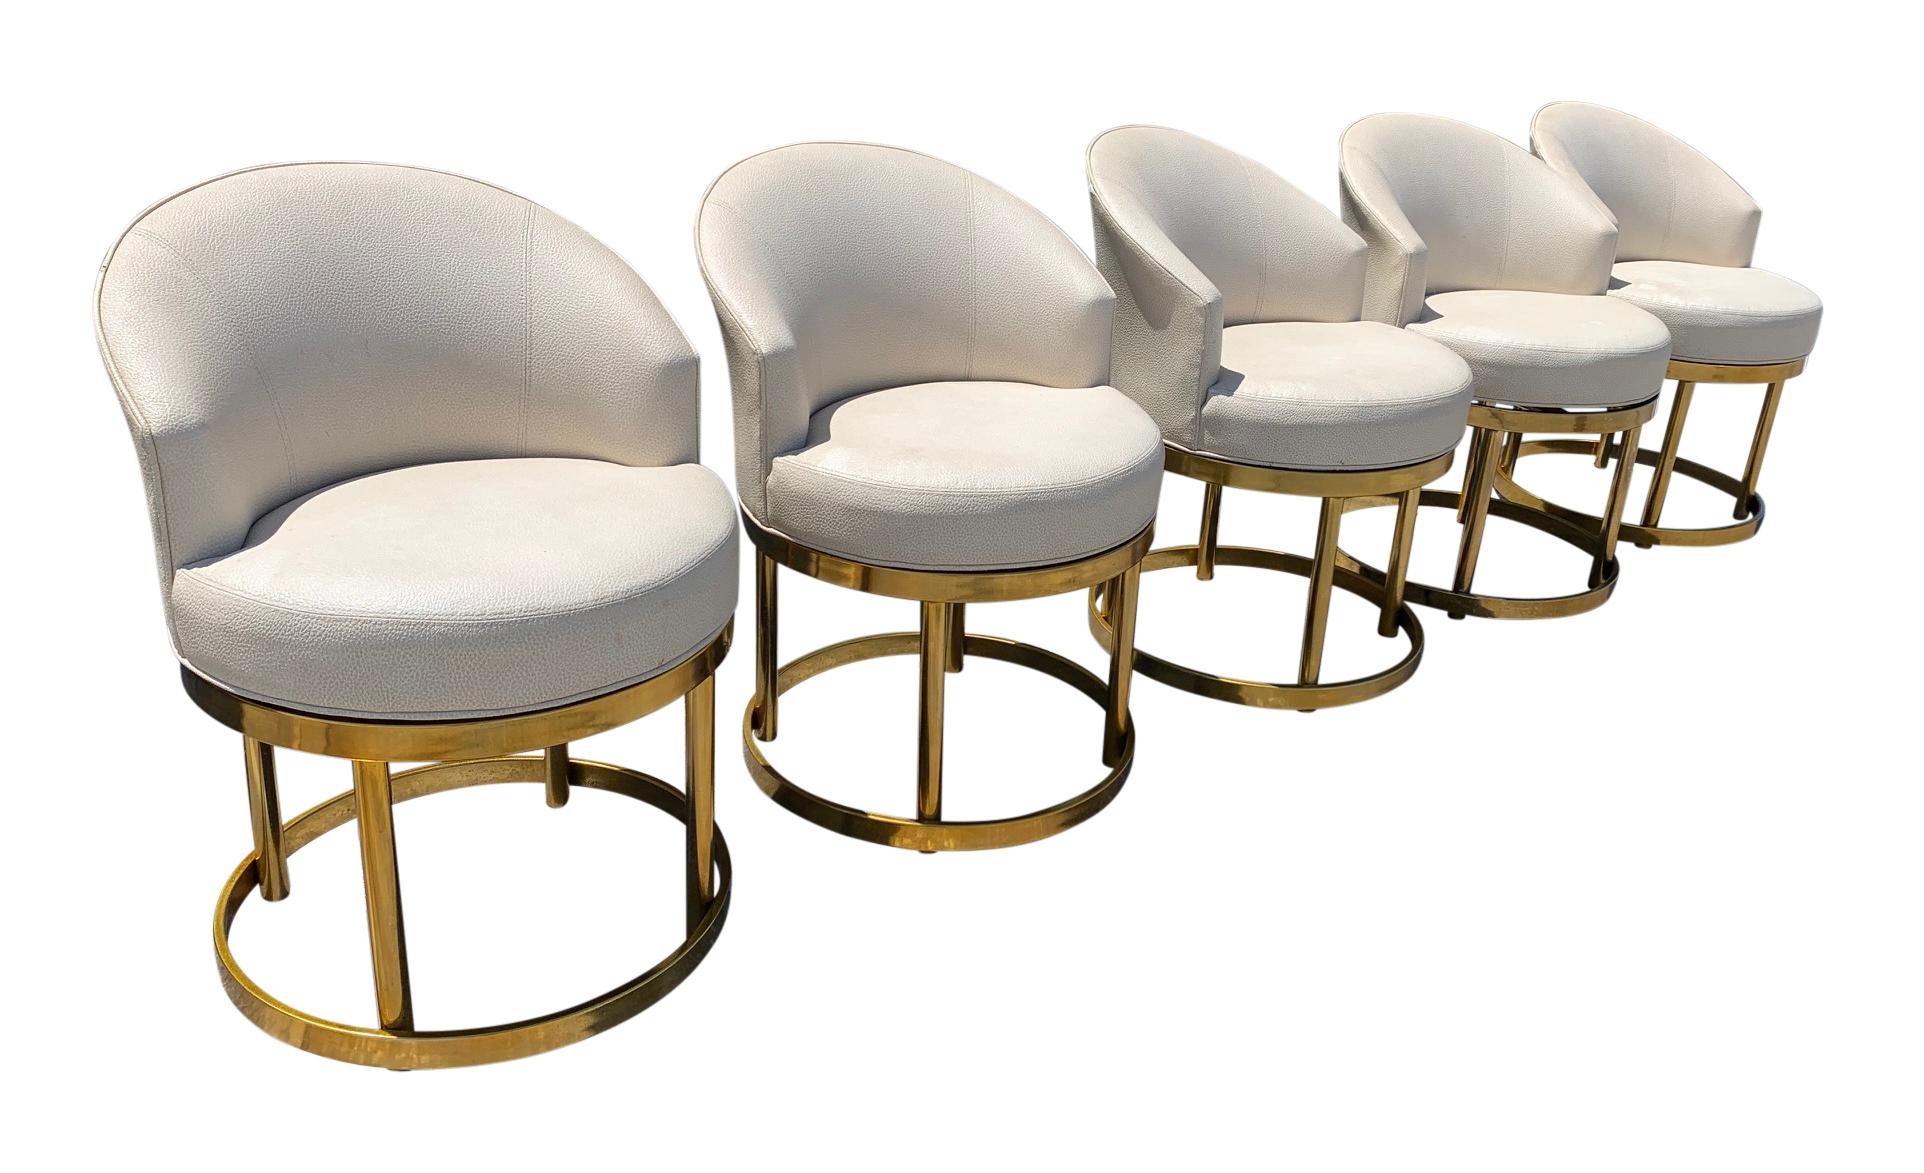 North American Swivel Stools on Brass Bases in the Manner of Milo Baughman